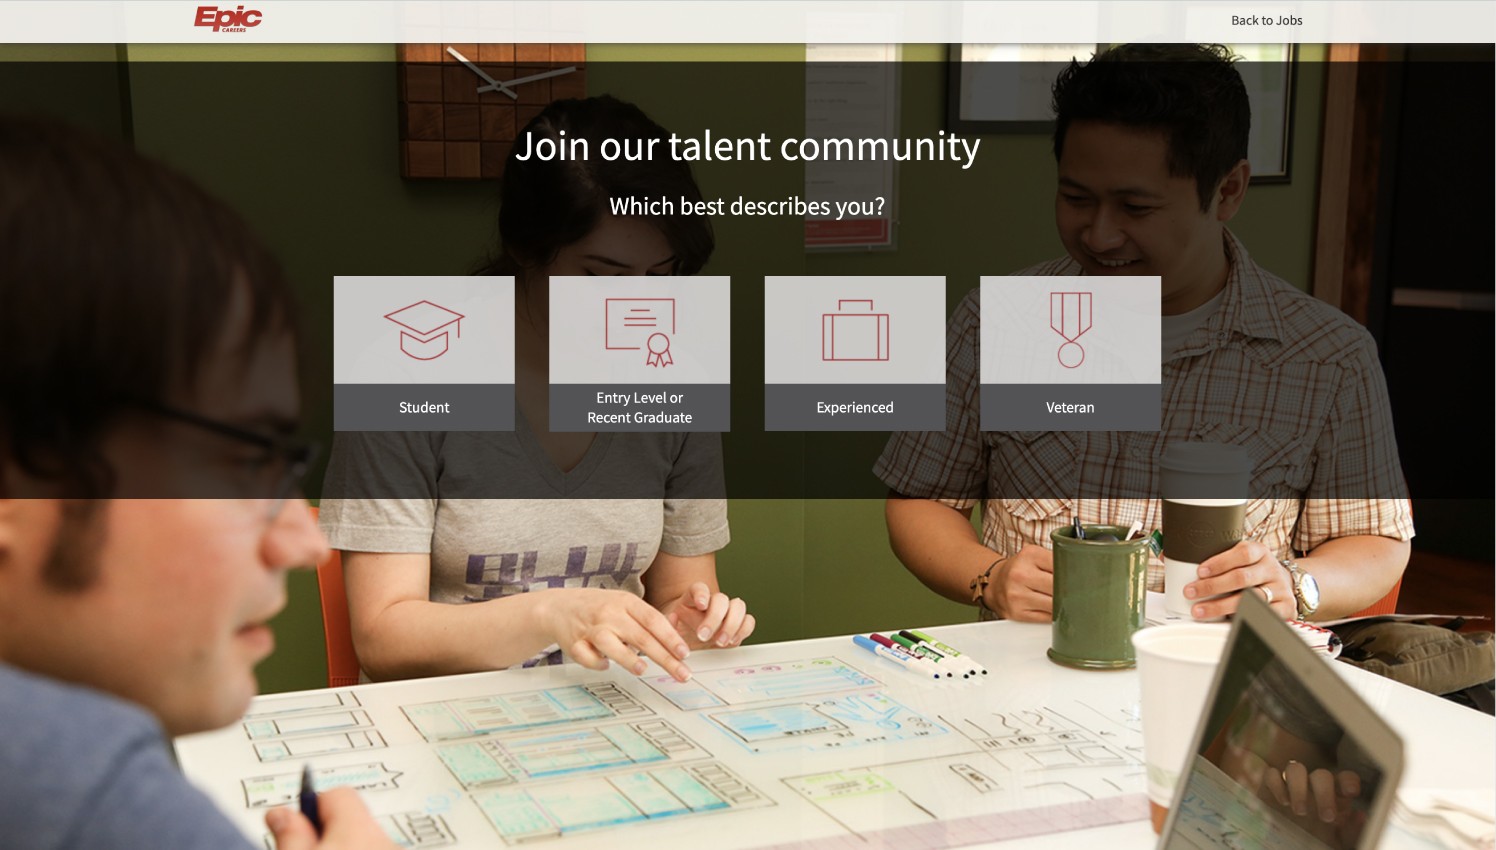 A portal from Epic Systems where users can join different talent comunities, with options for students, veterans and more.